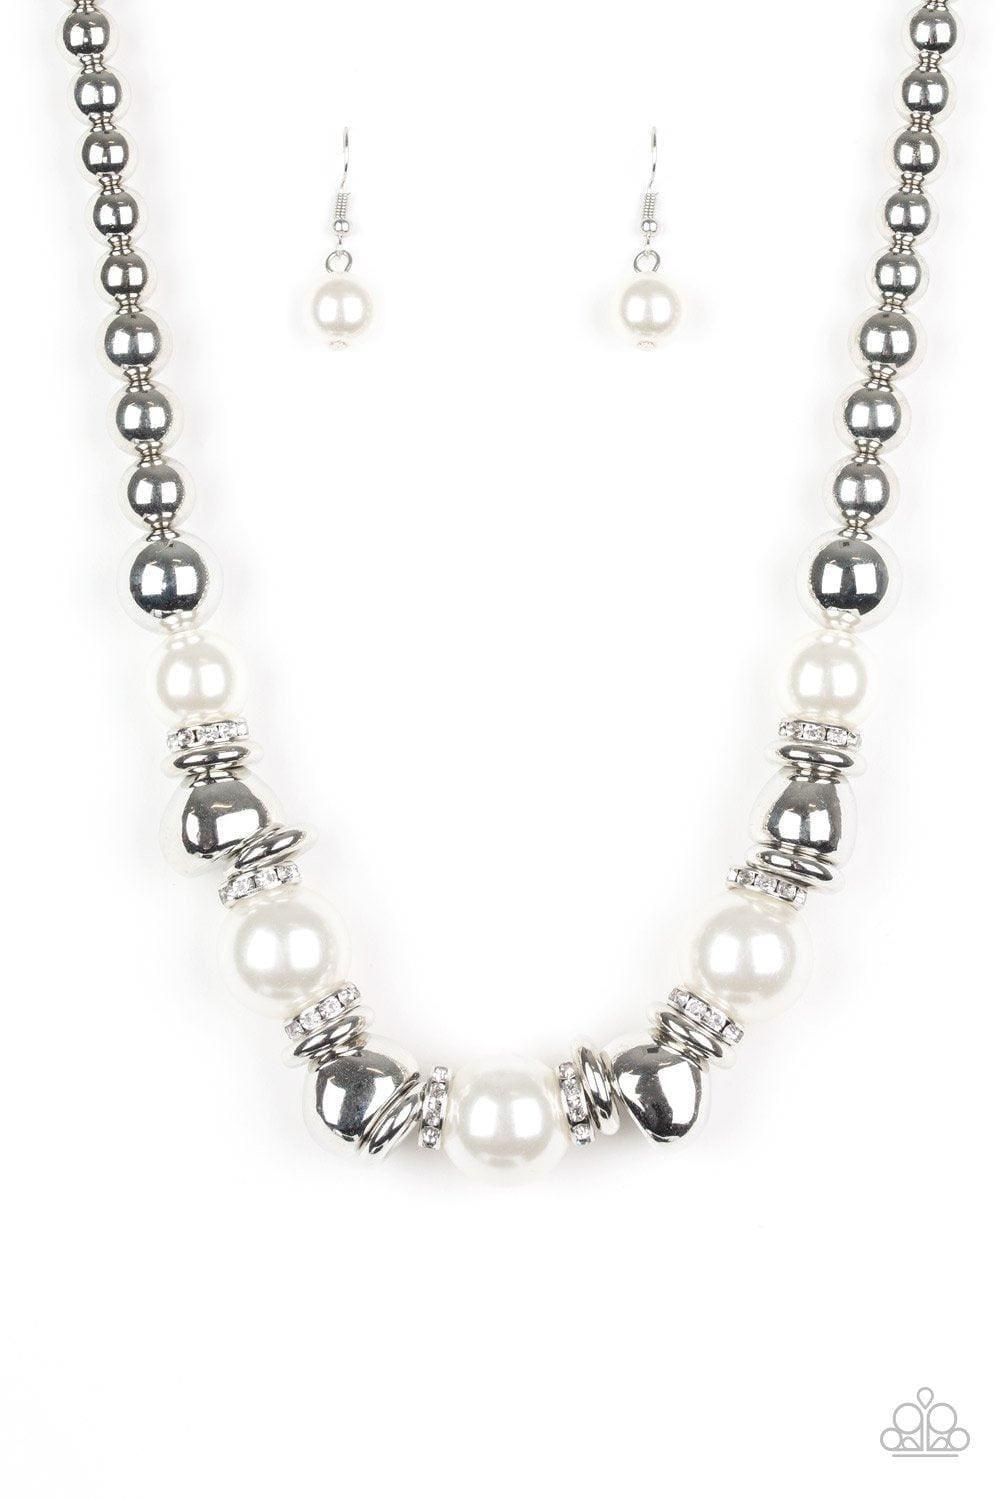 Paparazzi Accessories - Hollywood Haute Spot - White Necklace - Bling by JessieK